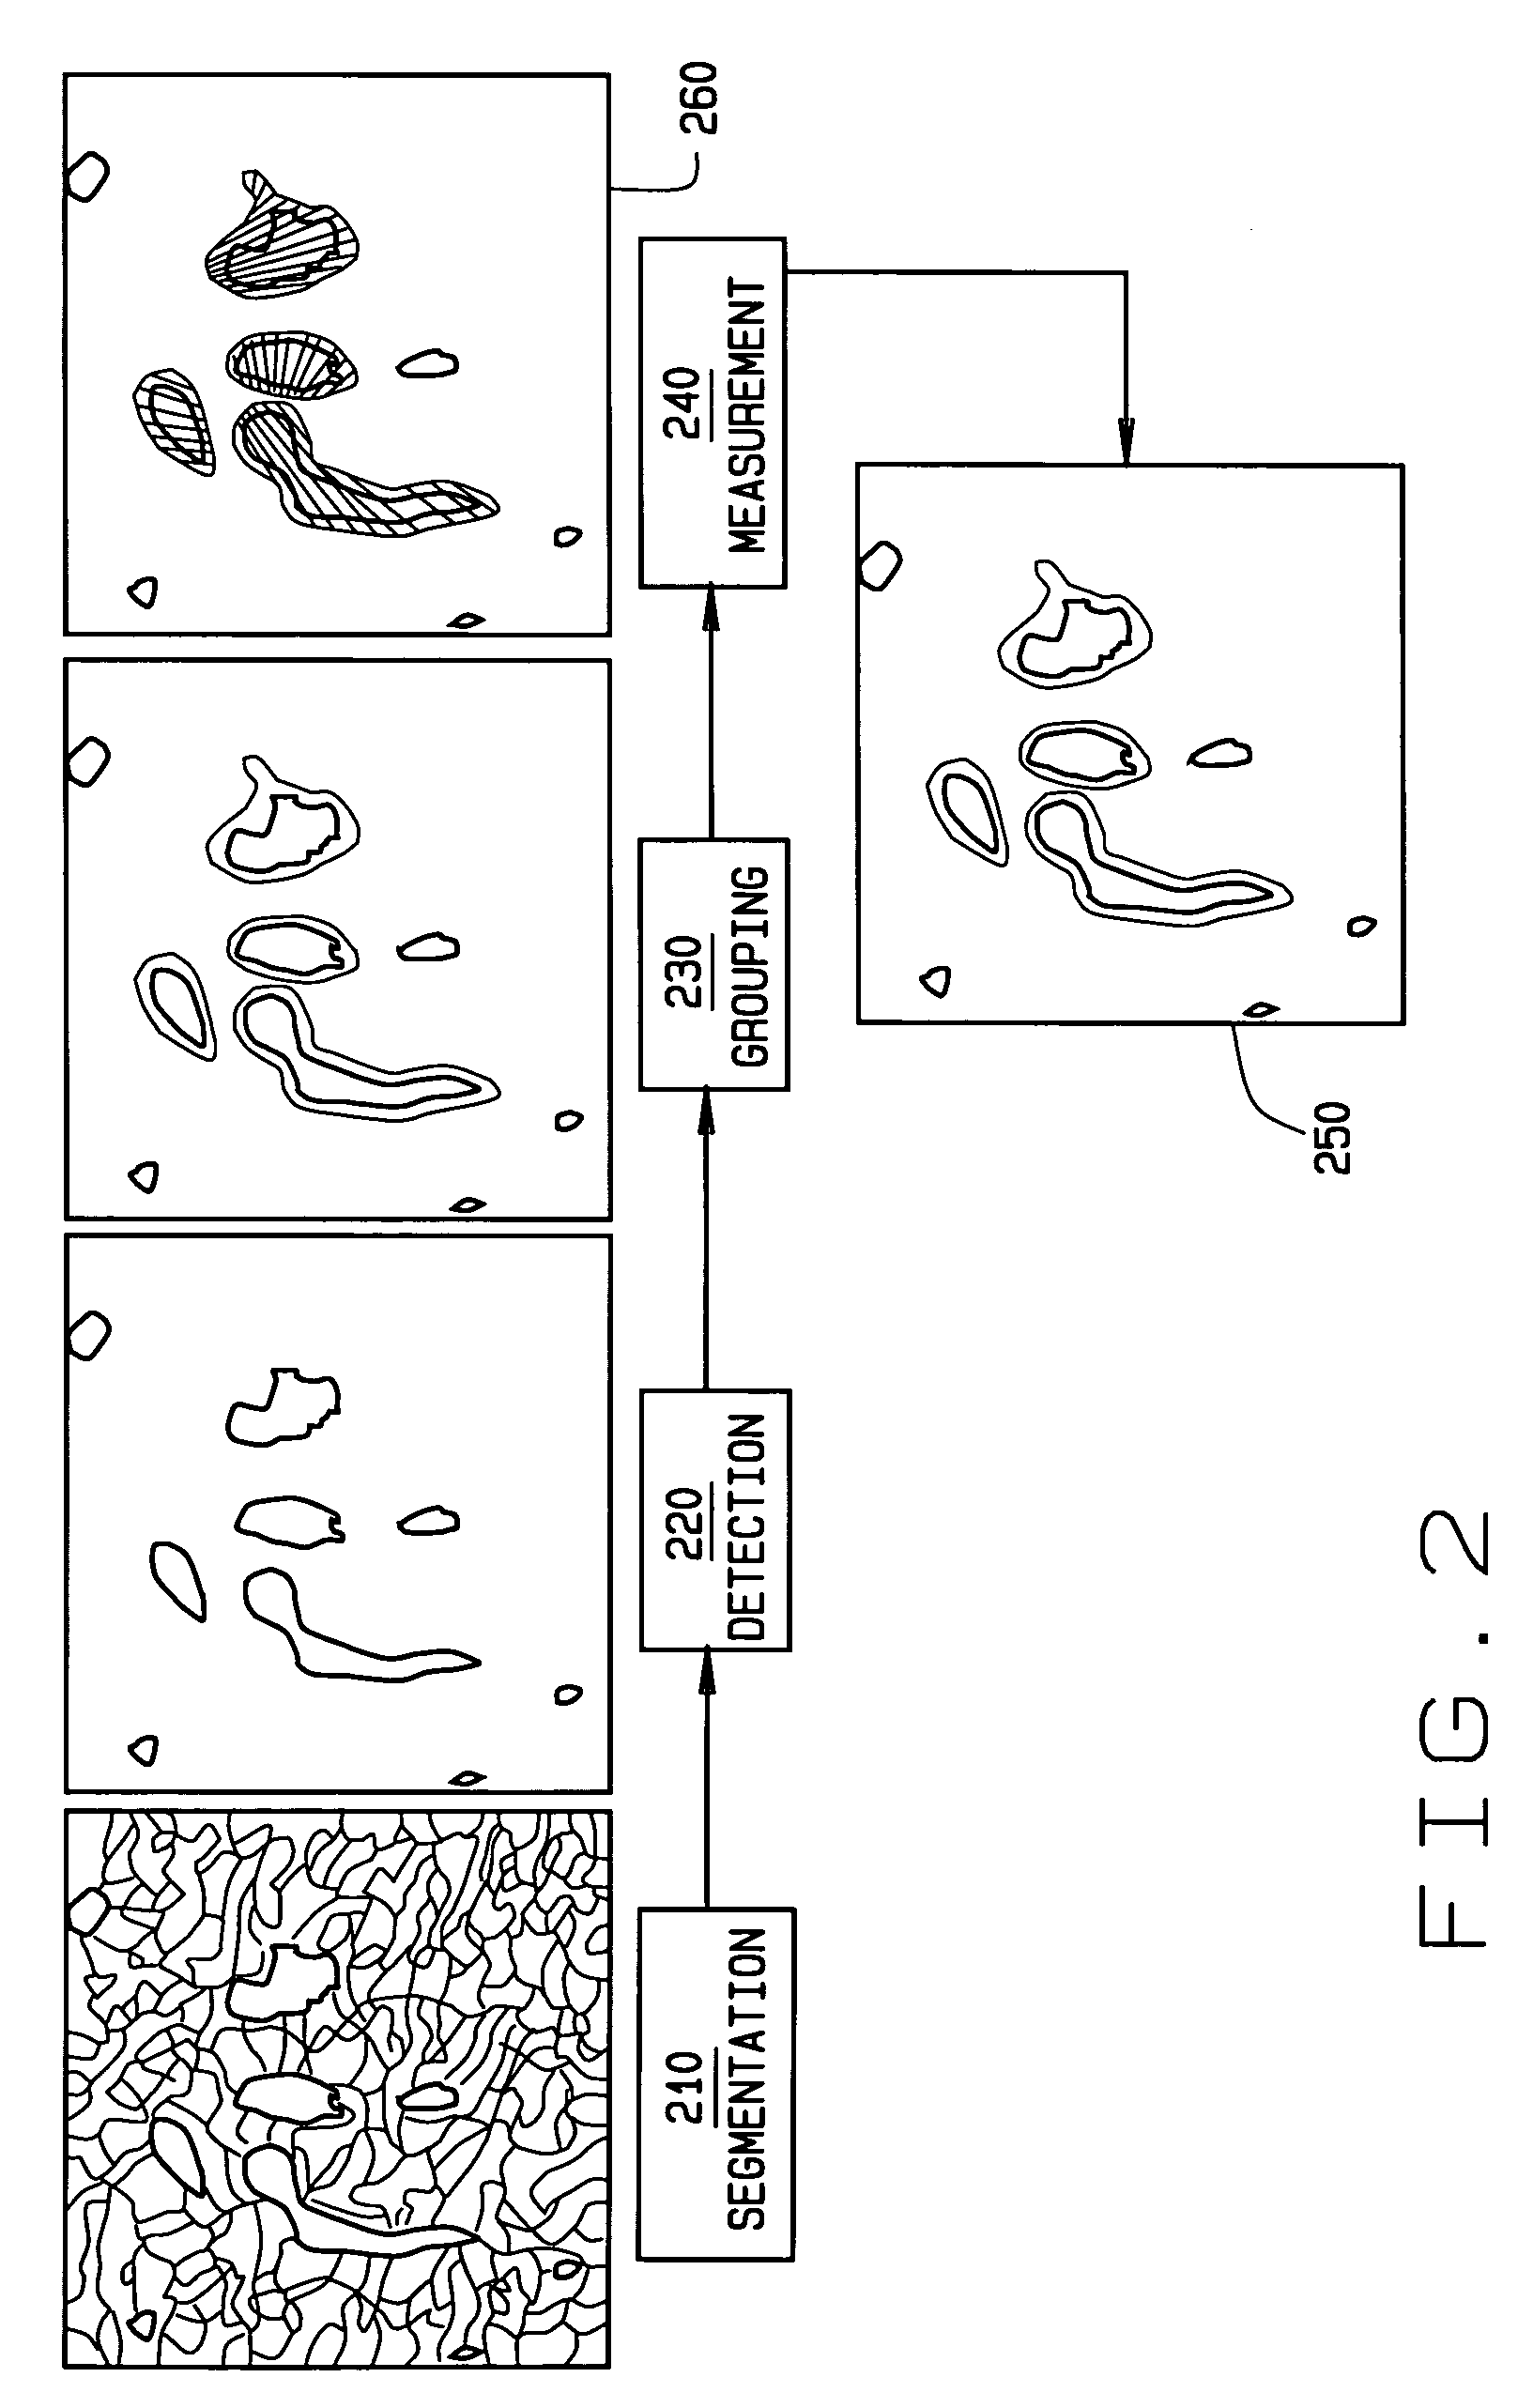 Methods and apparatus for processing image data to aid in detecting disease